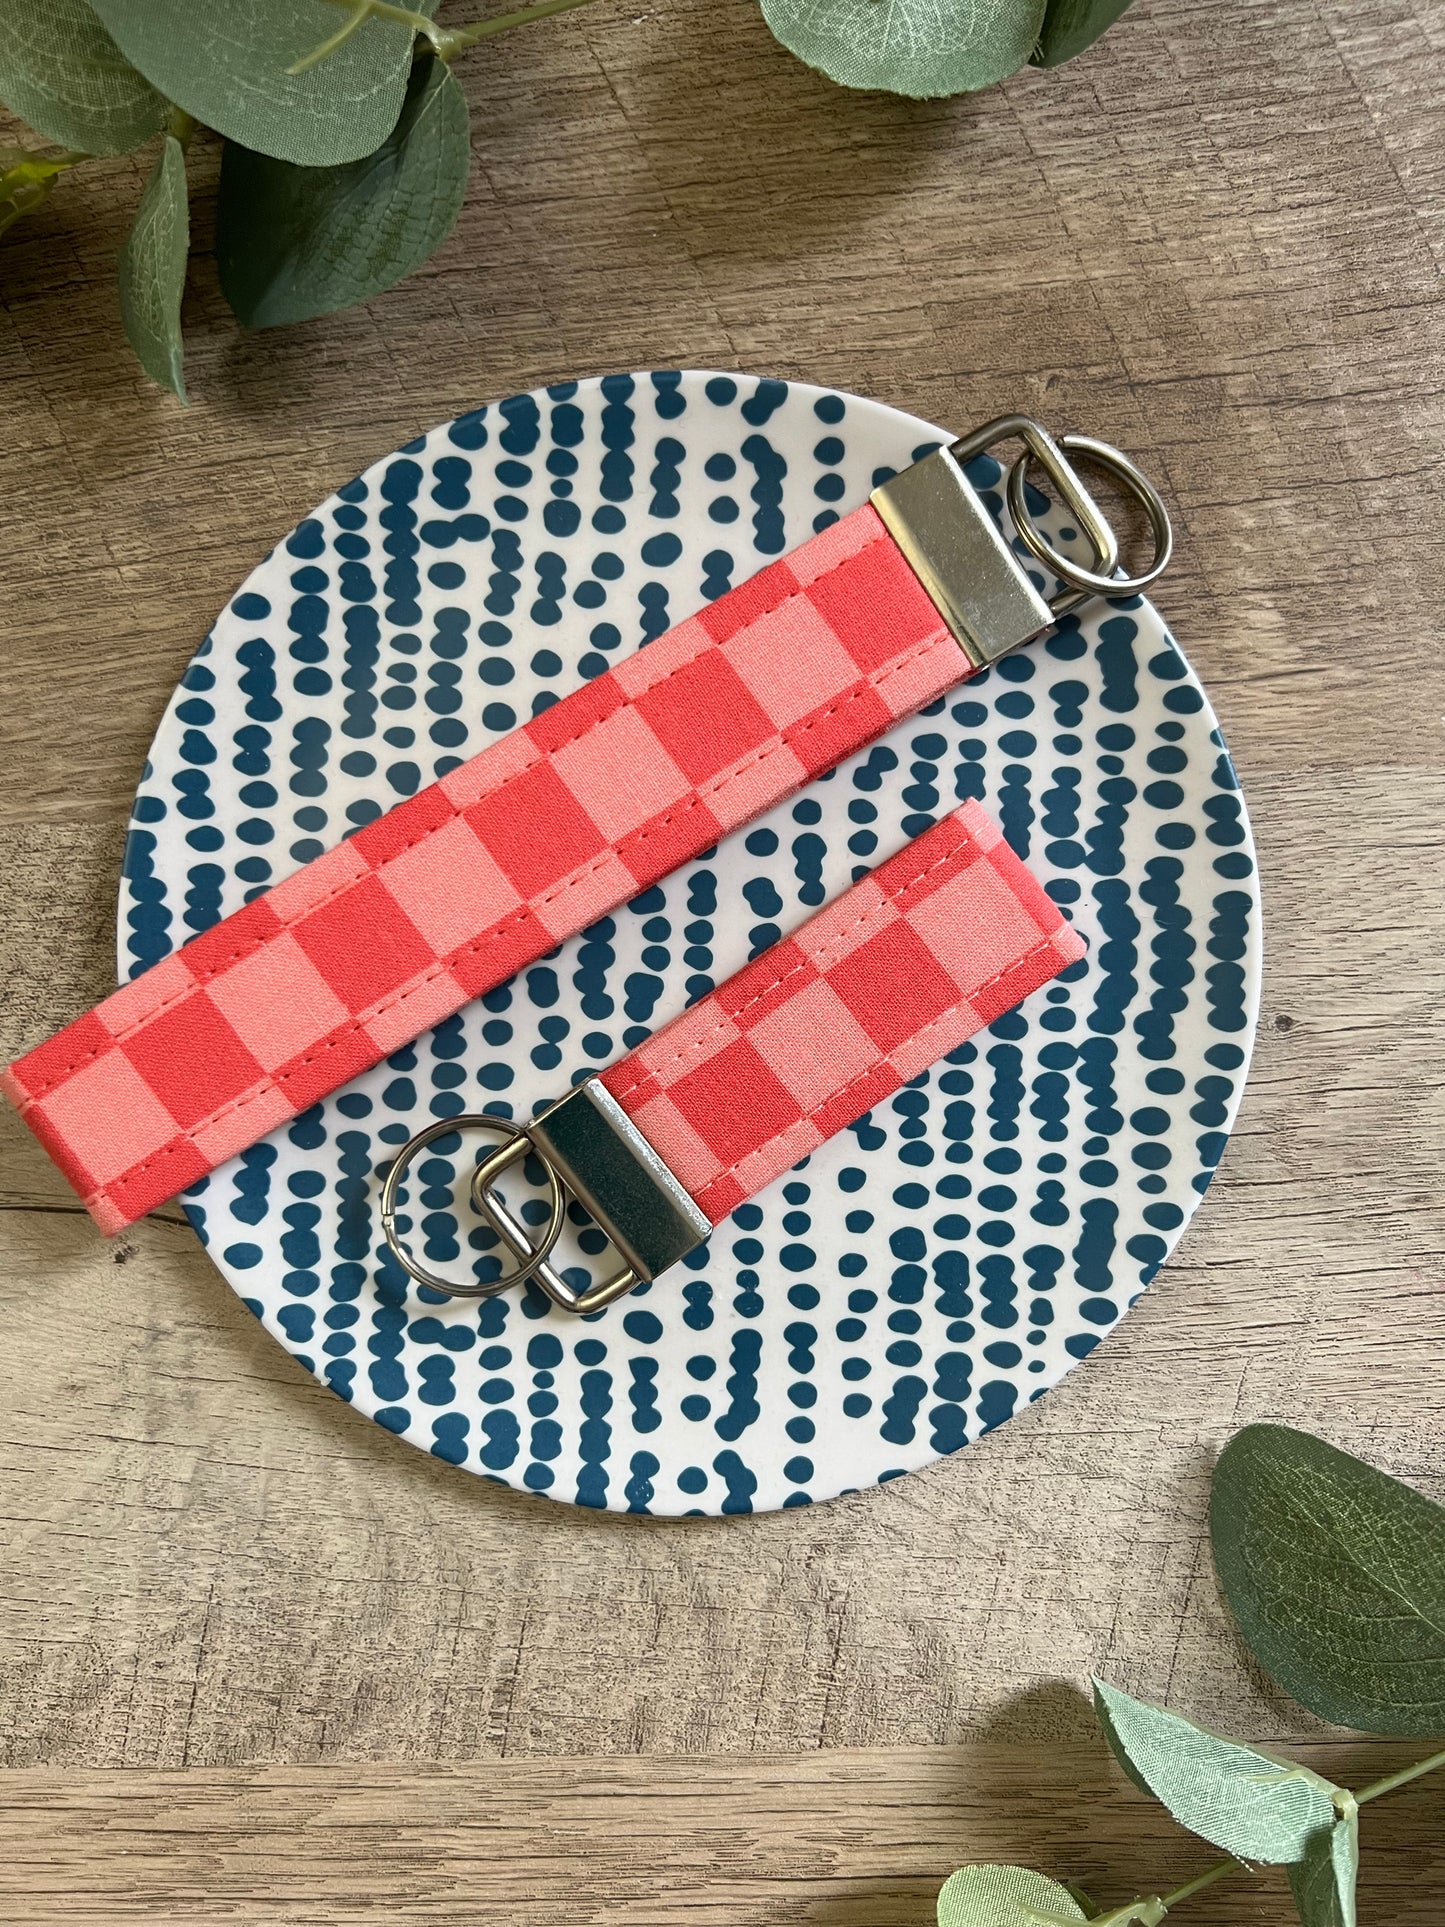 Coral Pink Checkered Fabric Key Fob - Wristlet and Mini Option - 1" Wide